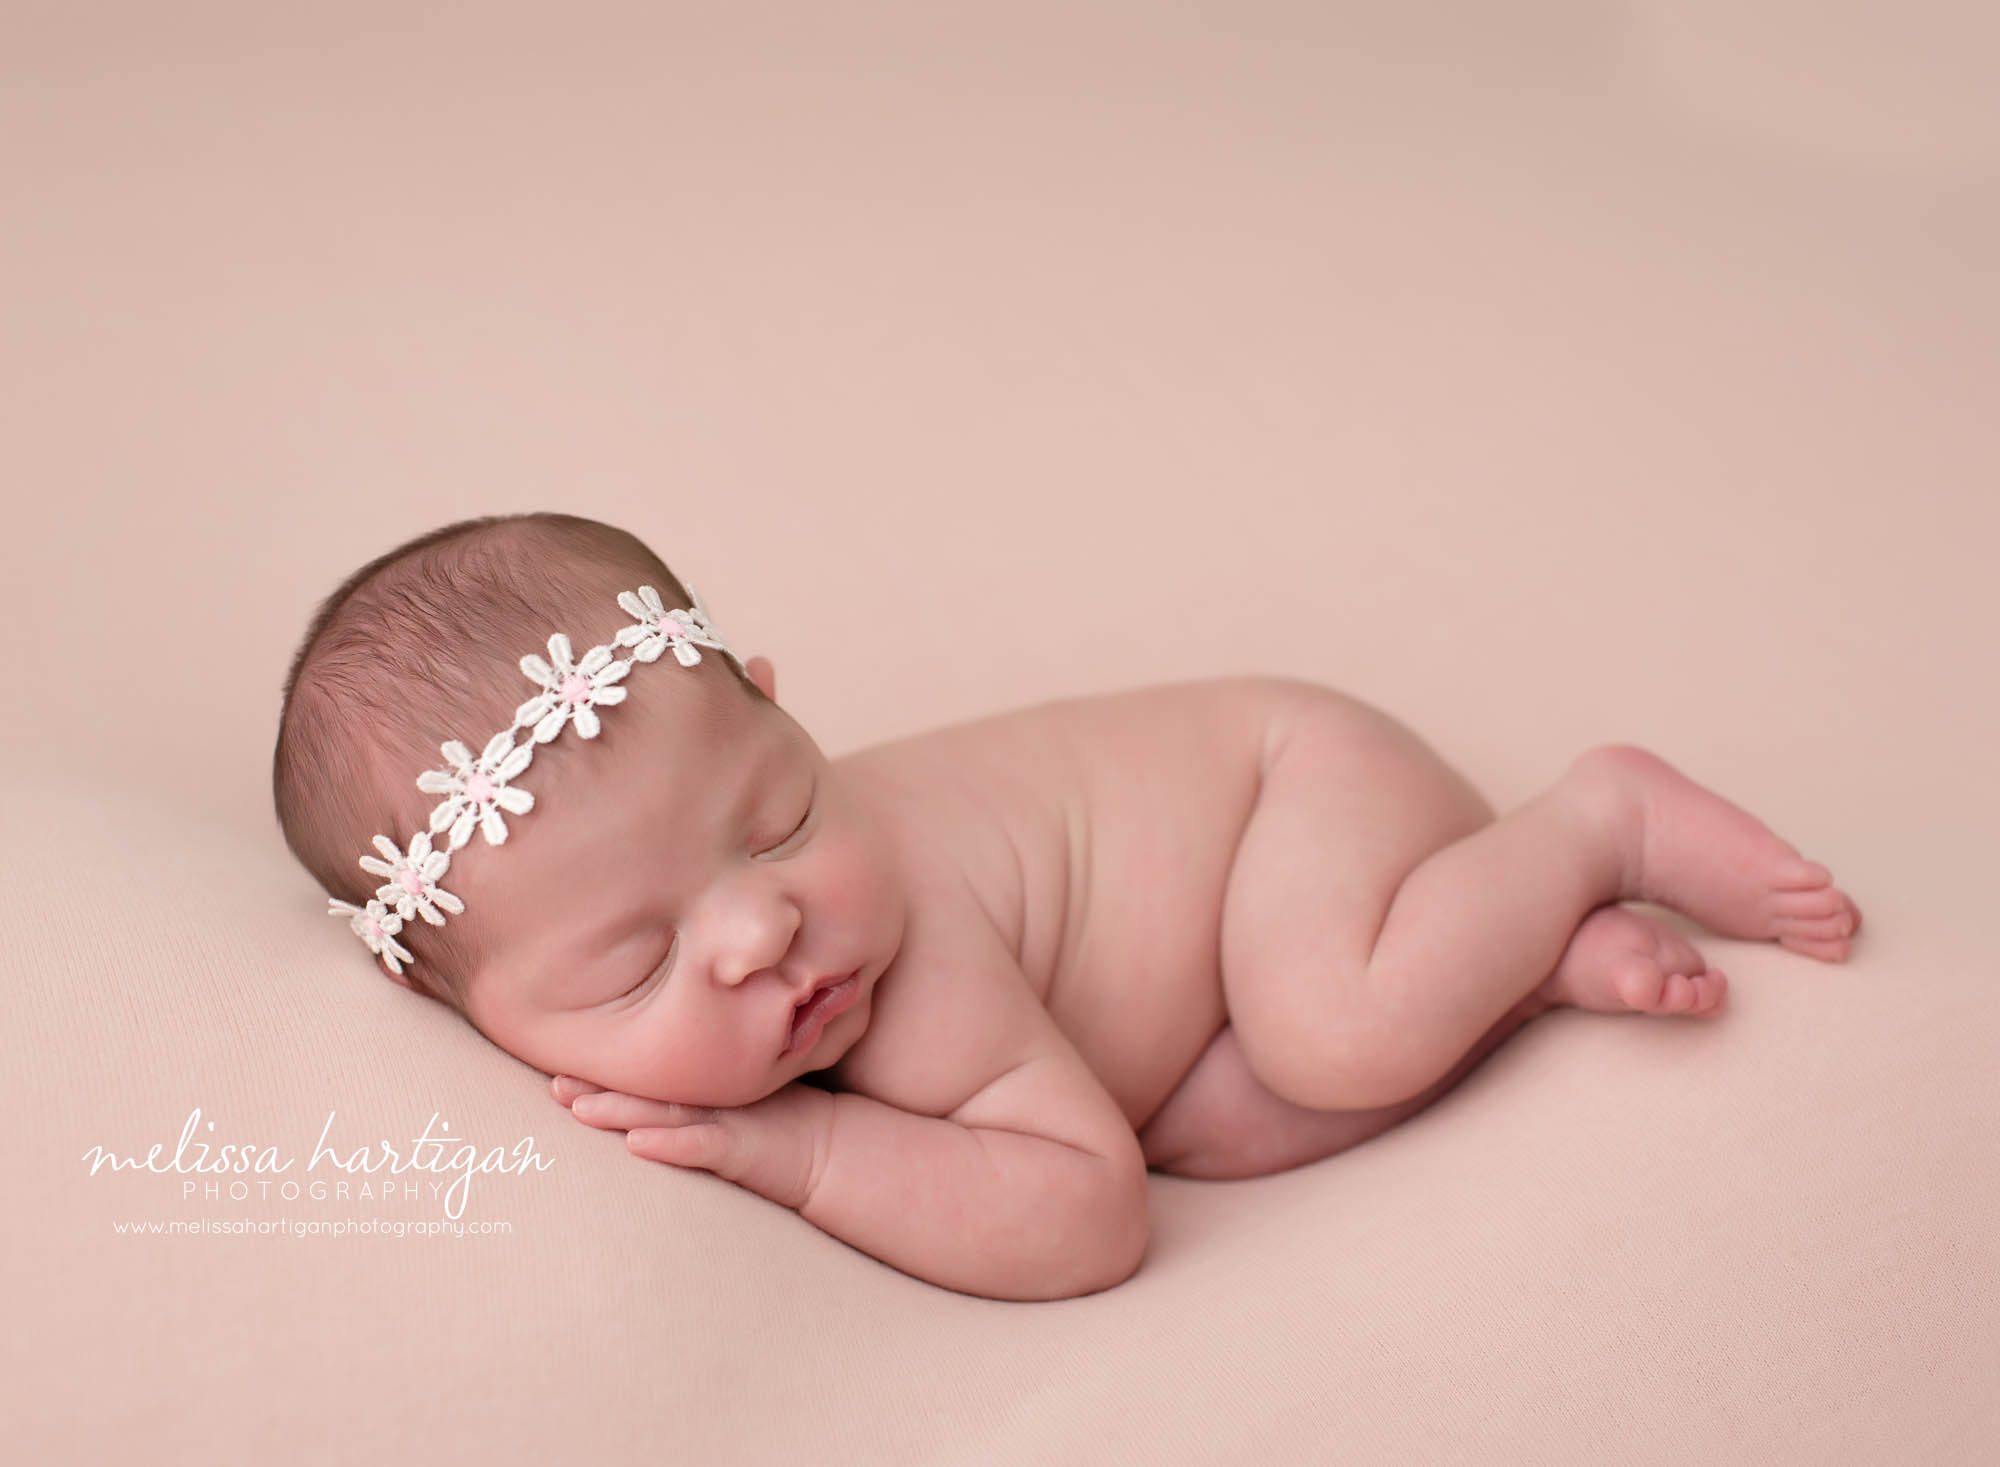 Baby girl posed on side with white flower headband